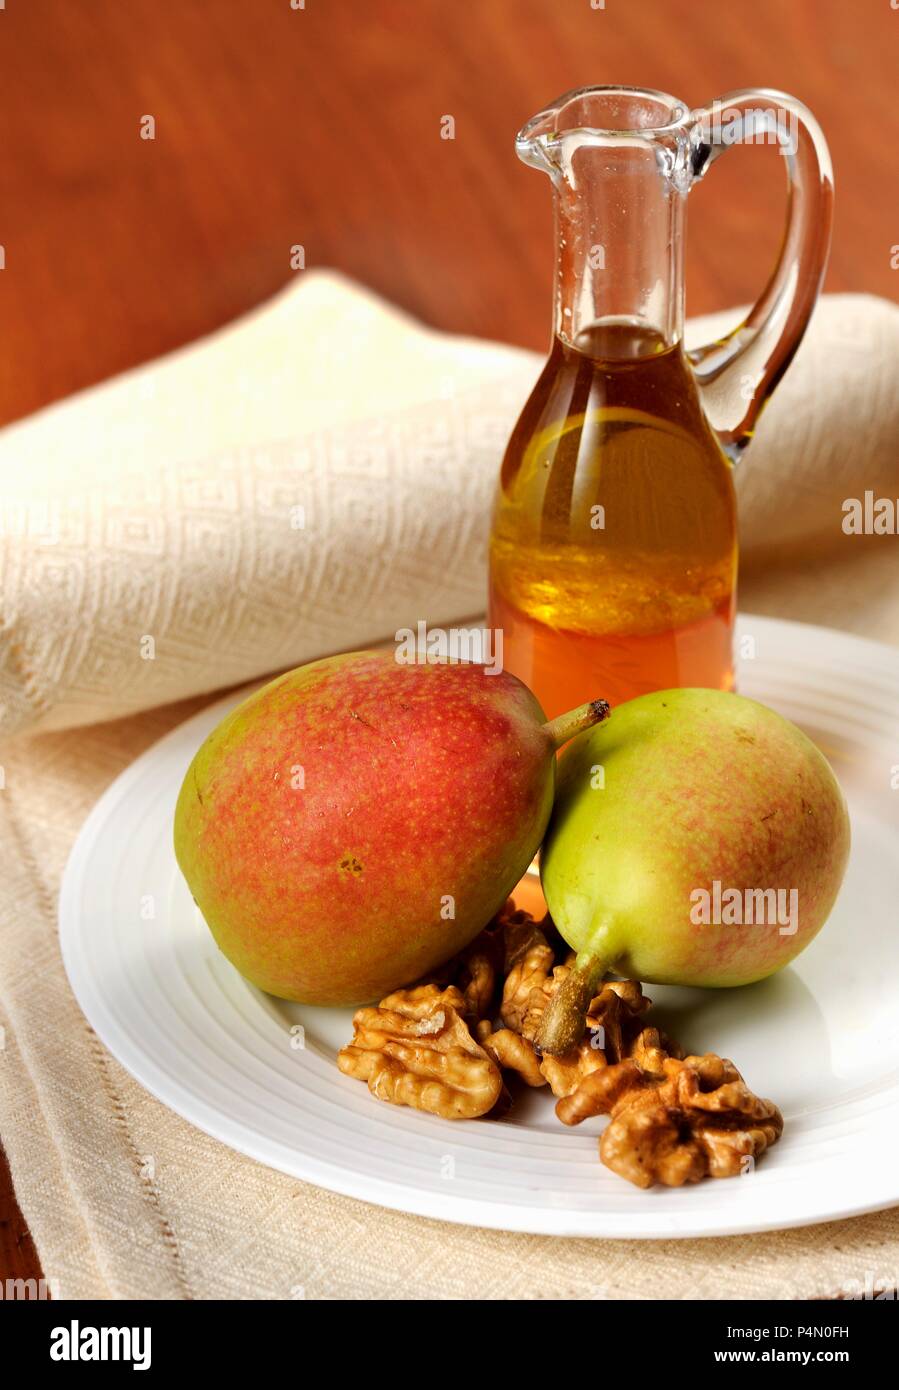 An arrangement of pears, nuts and liqueur Stock Photo